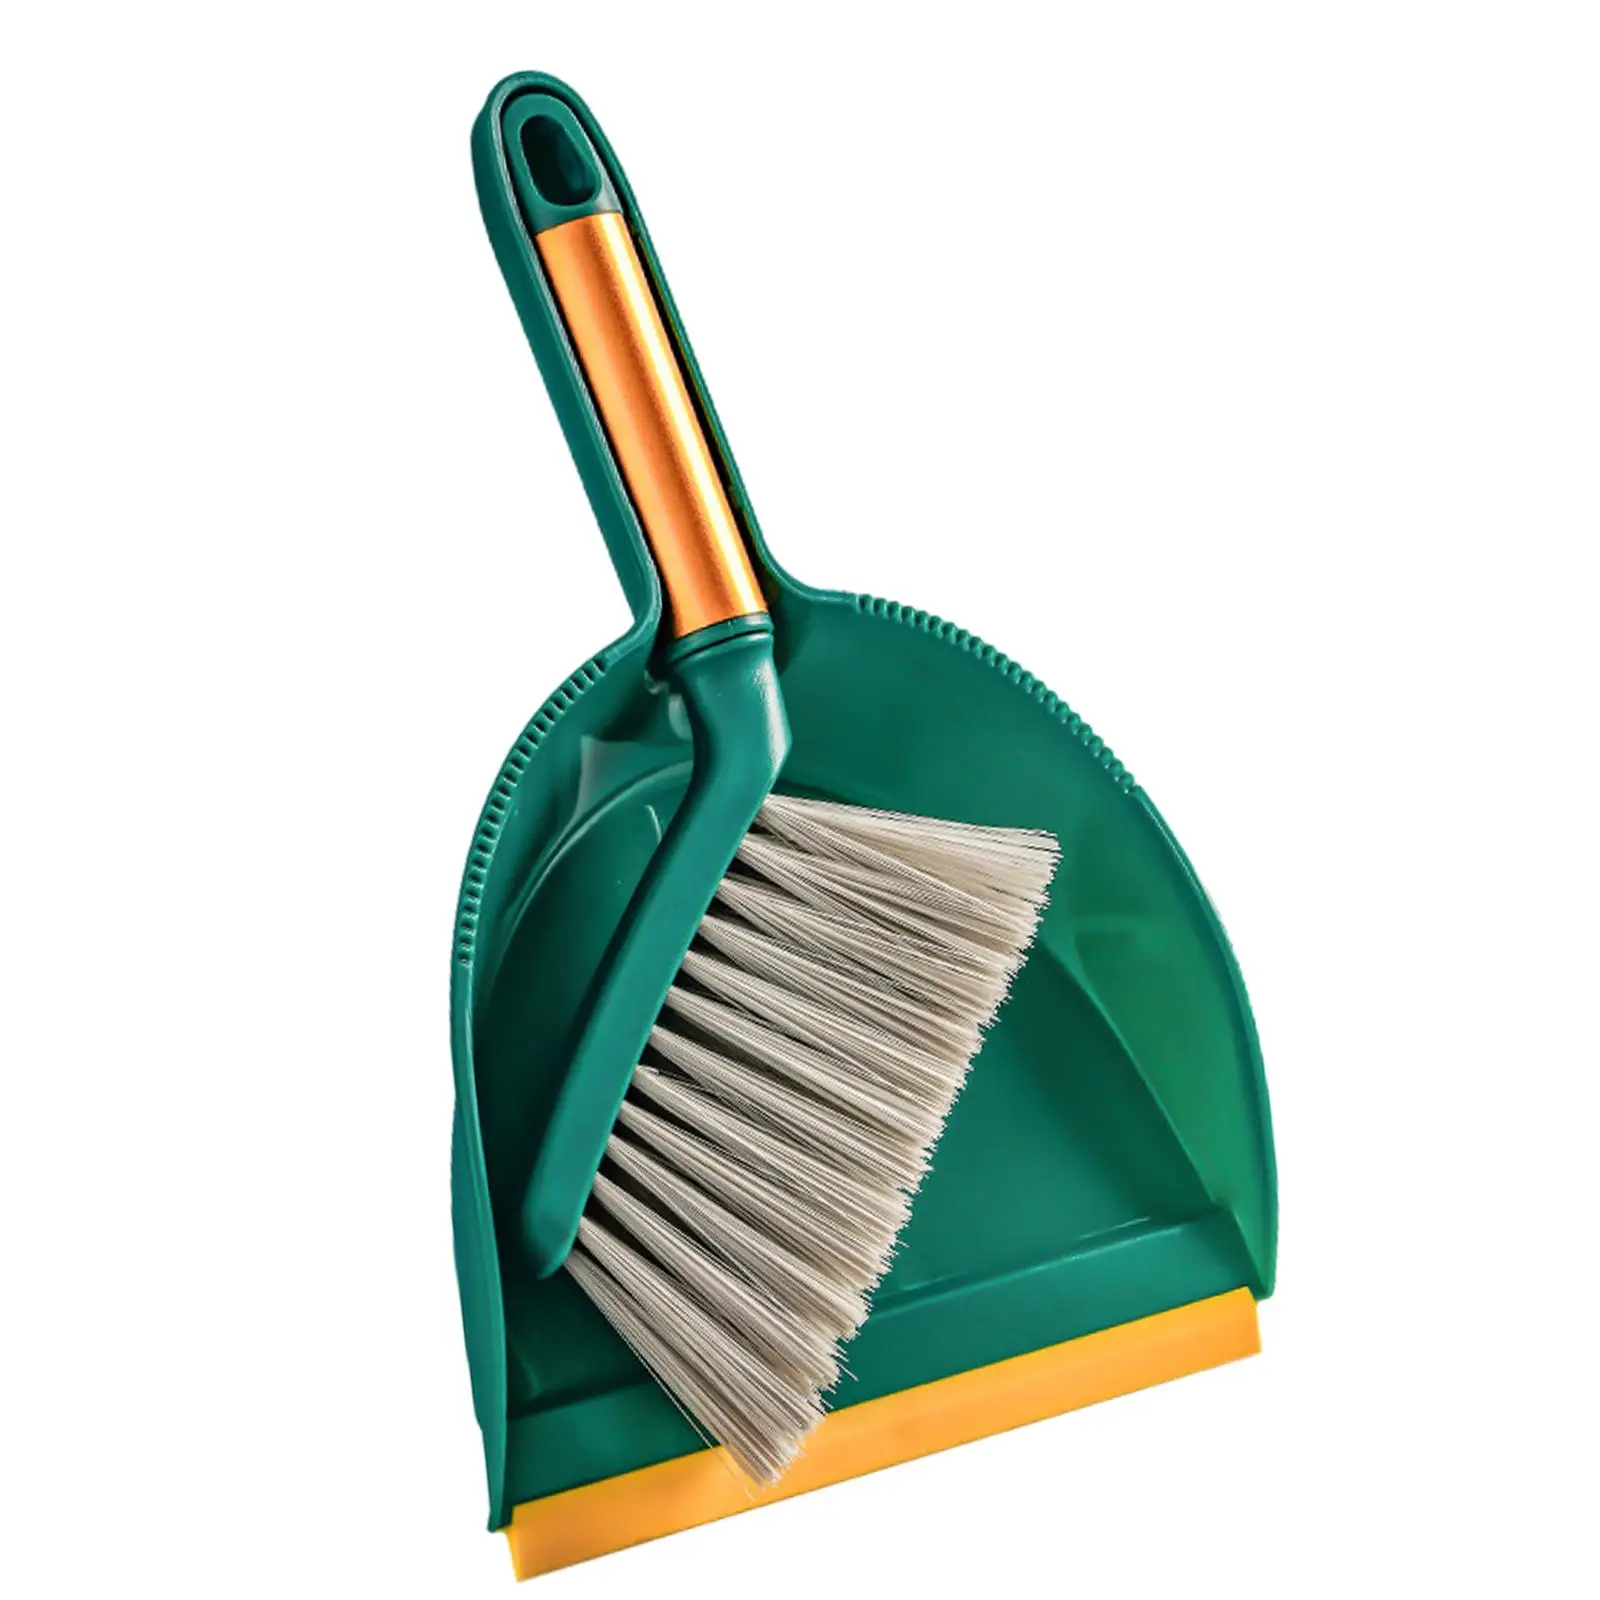 Small Broom and Dustpan Set Portable Hand Brush Dust Pan Keyboard Sweep Broom Cleaning Brush for Desktop Office Car Home Table